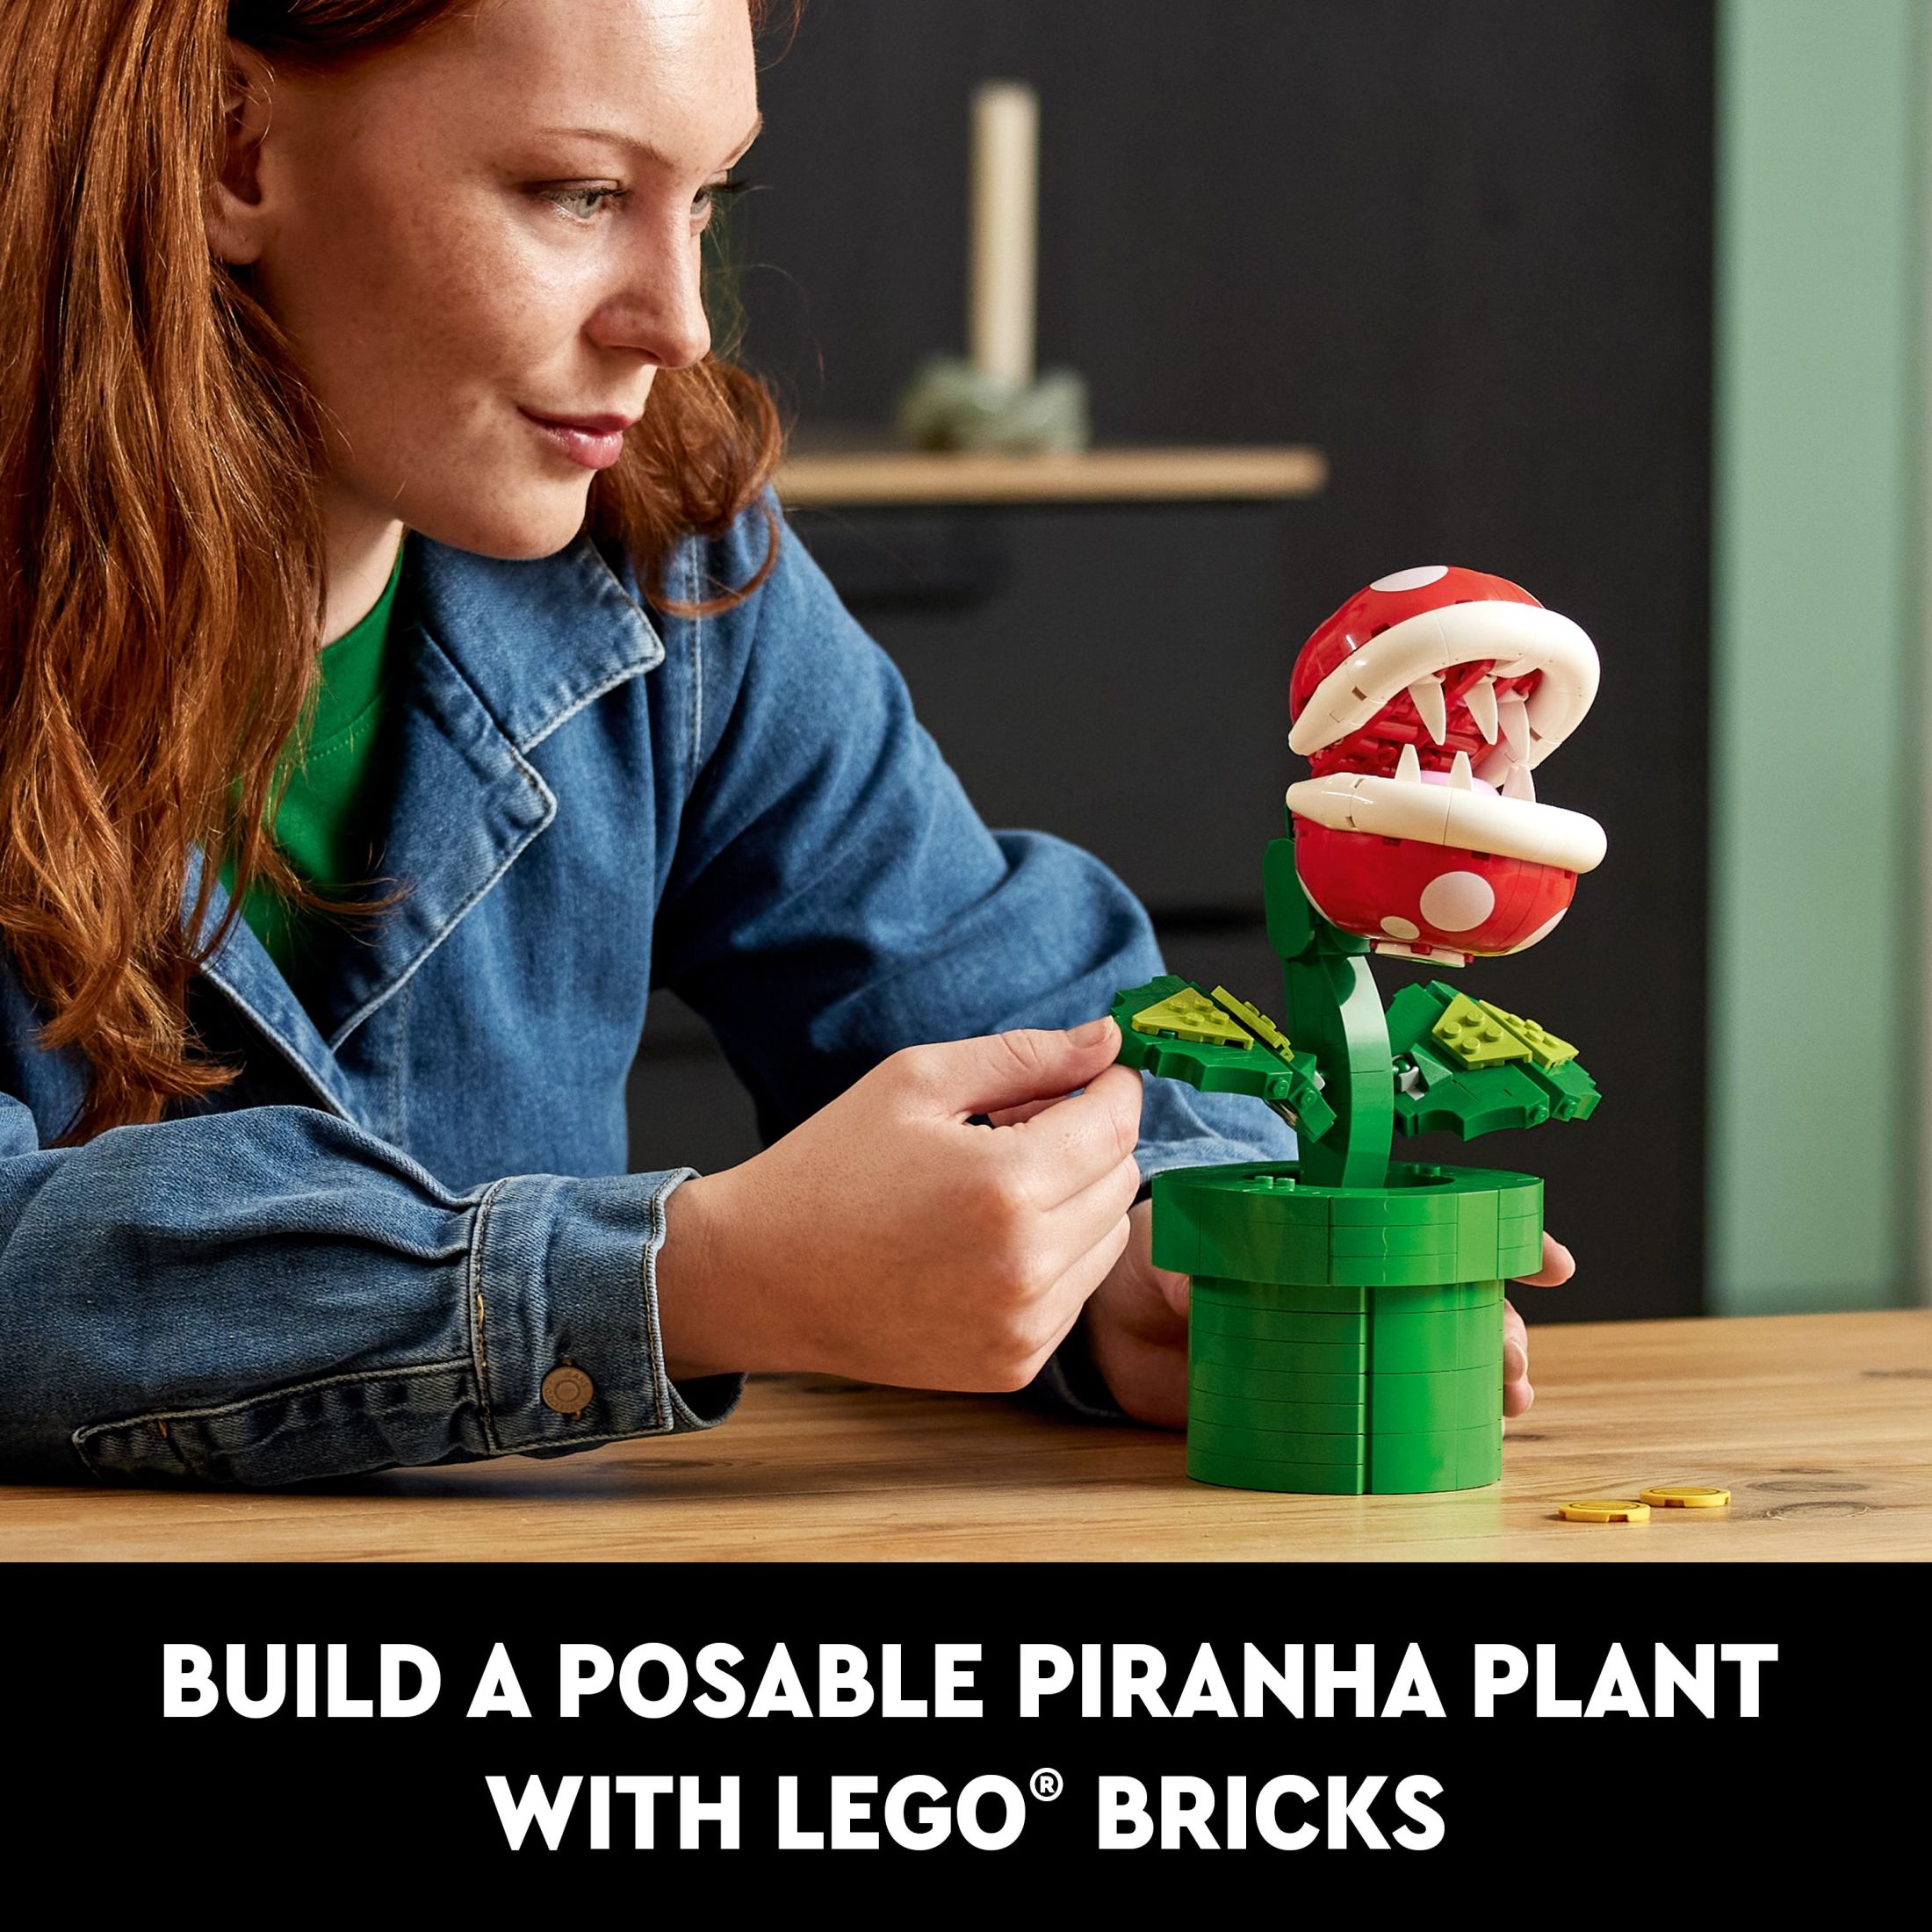 LEGO Super Mario Piranha Plant, Build and Display Super Mario Brothers Collectible for Adults and Teens, Authentically Detailed Posable Figure, Birthday Gift for Gamers and Super Mario Fans, 71426 - image 3 of 7